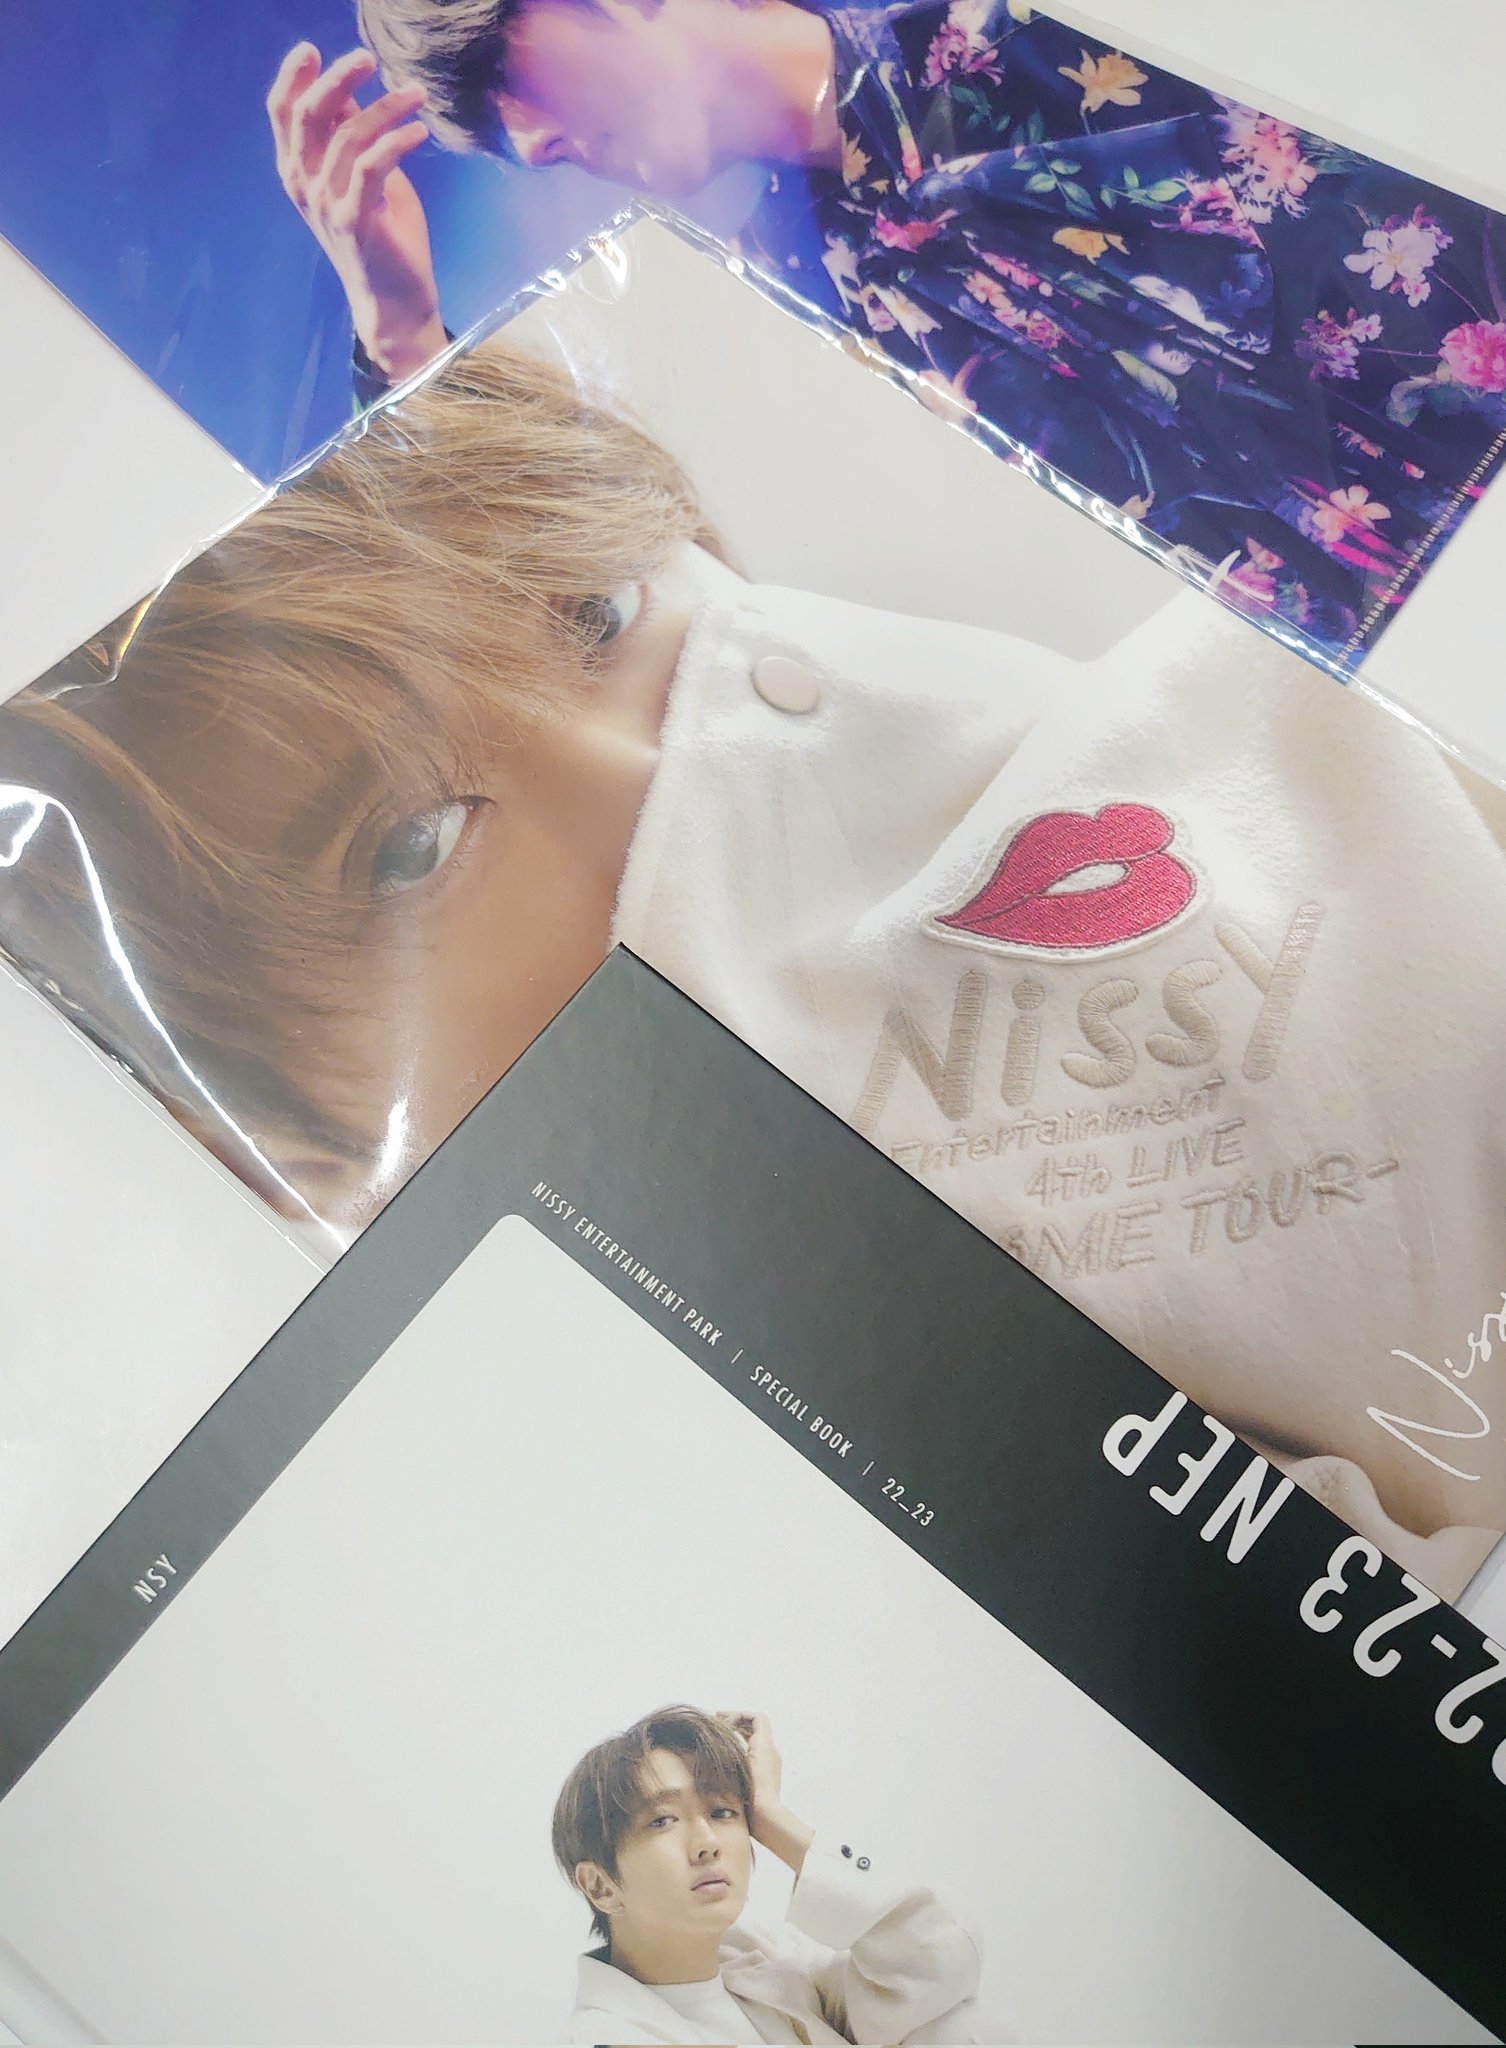 Nissy Entertainment 4th LIVE -DOME TOUR-新品未開封品です